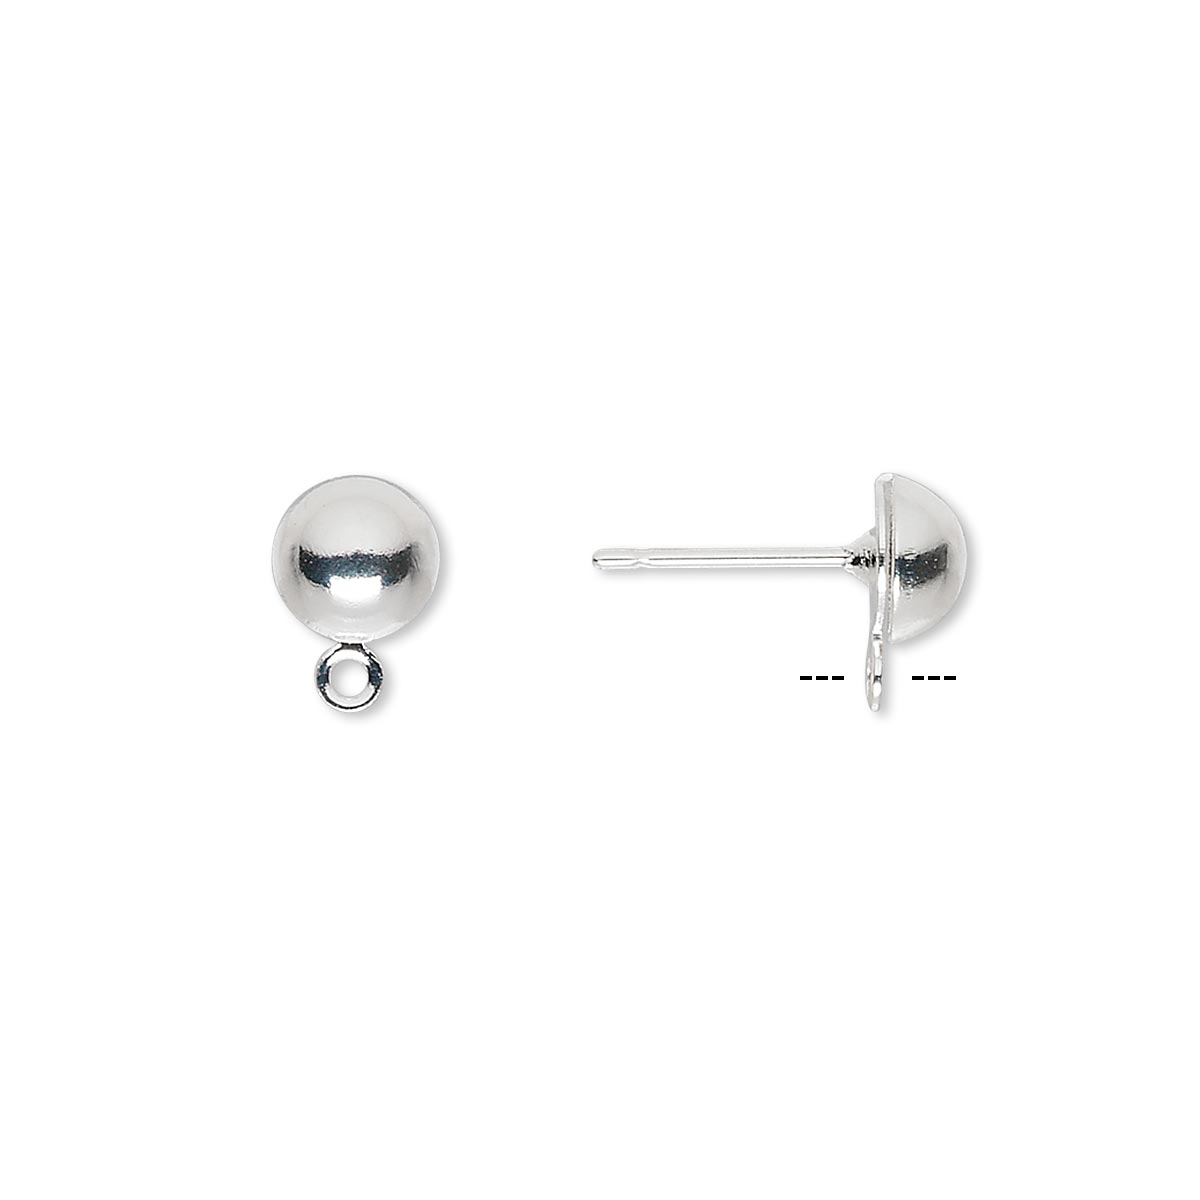 Earstud, silver-plated brass and stainless steel, 6mm half ball with ...